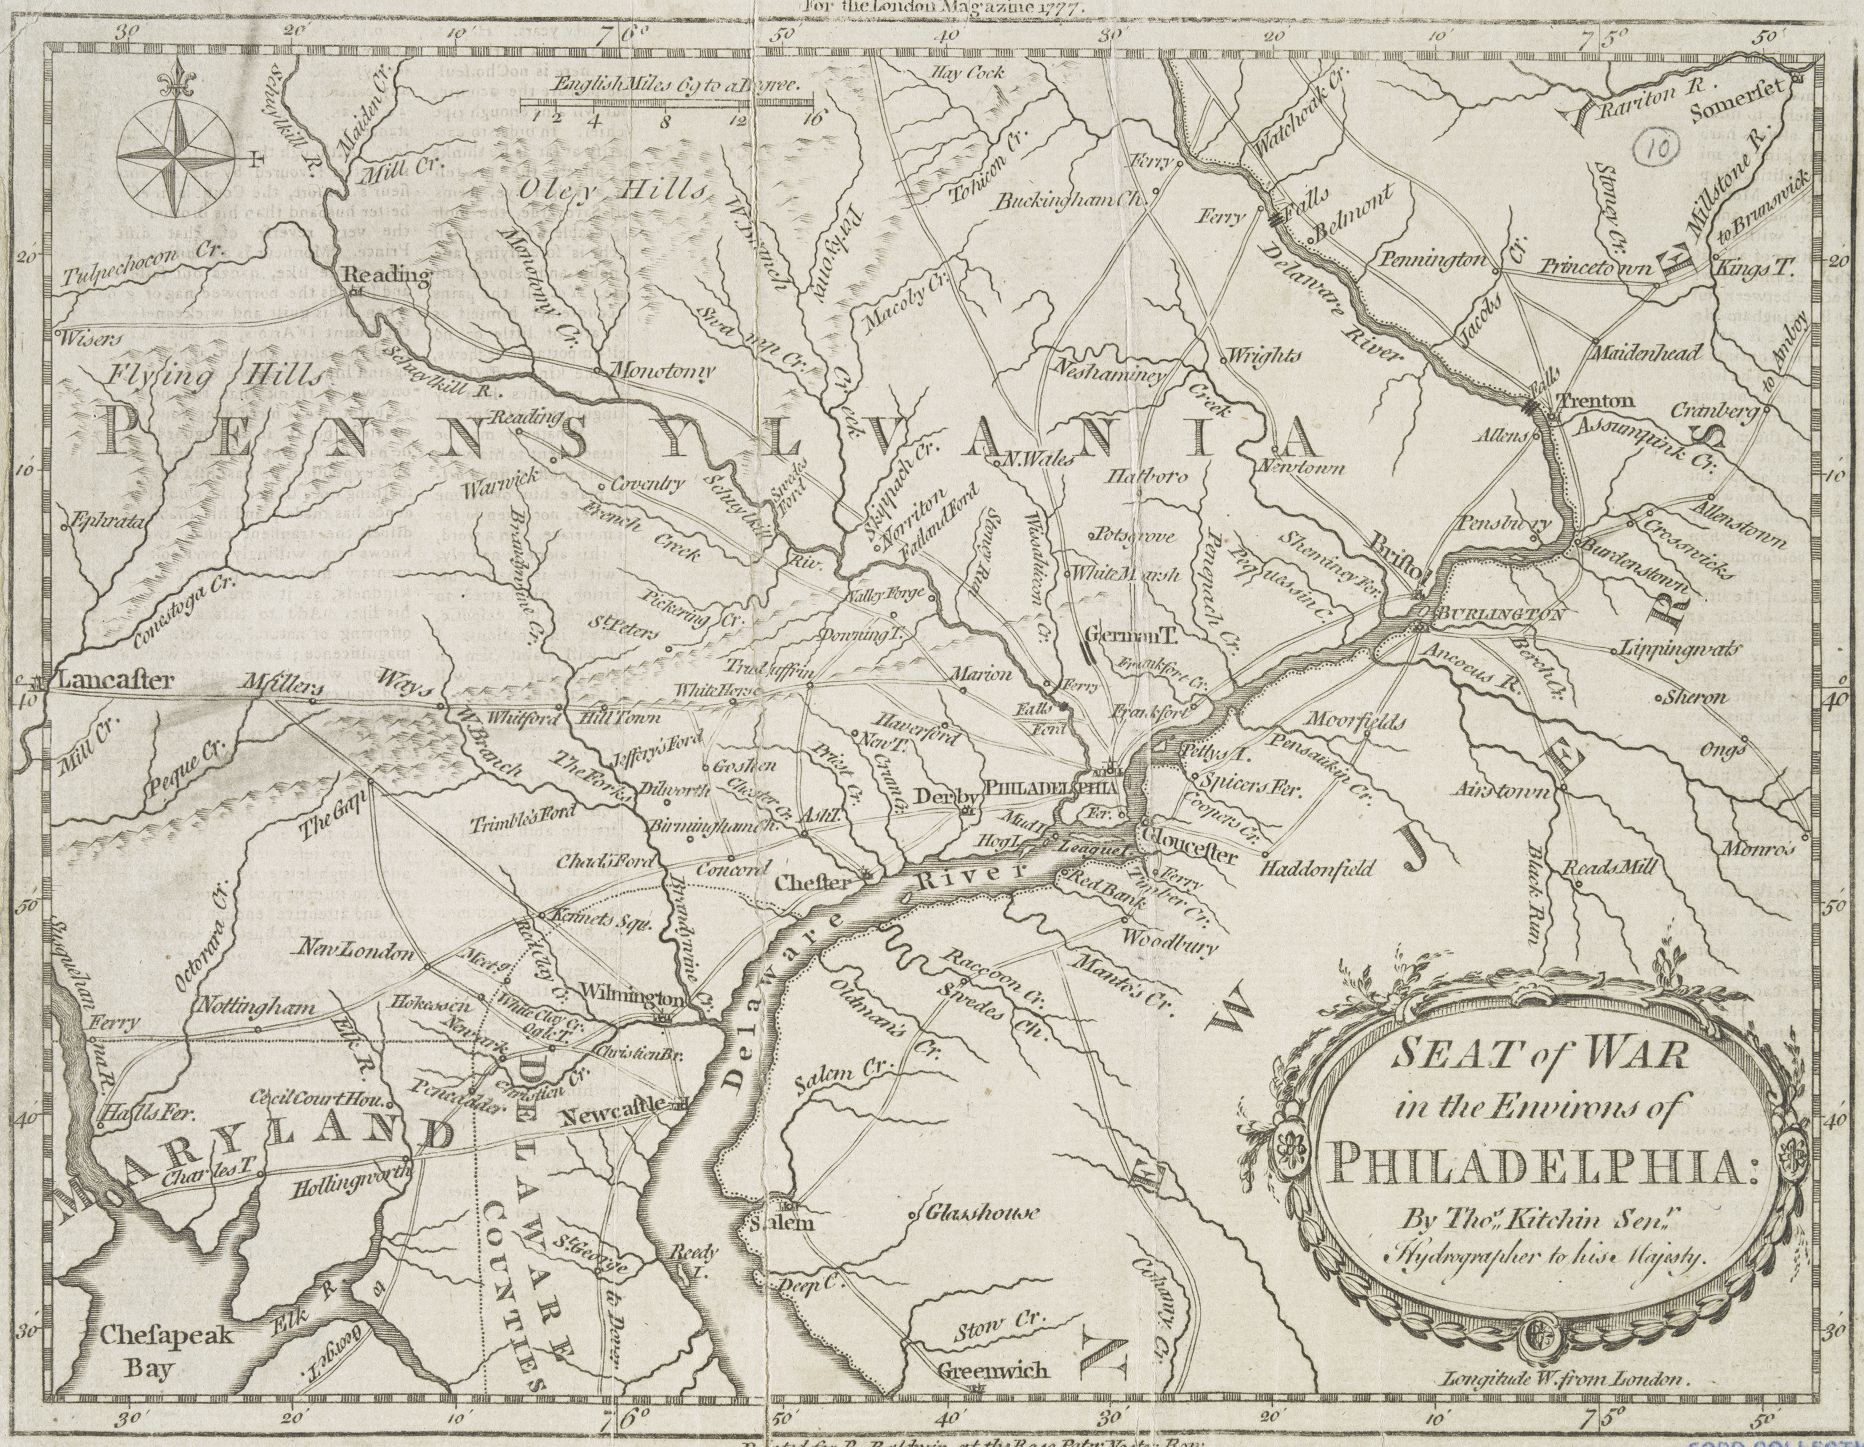 A black and withe map titled <em>Seat of War in the Environs of Phildelphia</em>, showing southeast Pennsylvania alongisde parts of Maryland, Delaware, and New Jersey